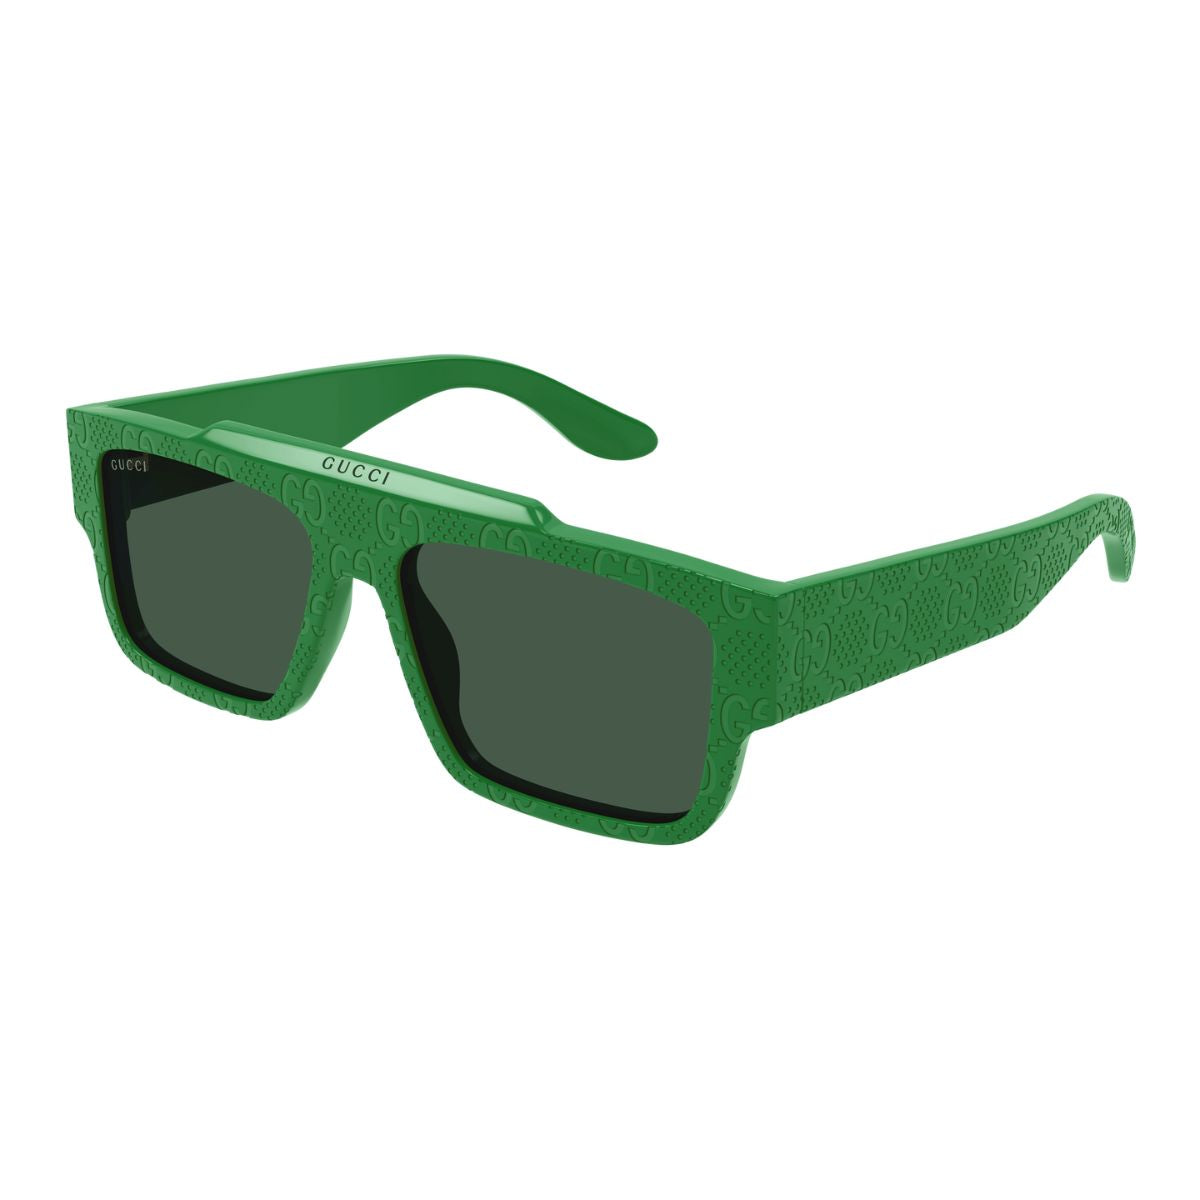 "Shop Stylish Green Square Sunglass From Gucci At Optorium"